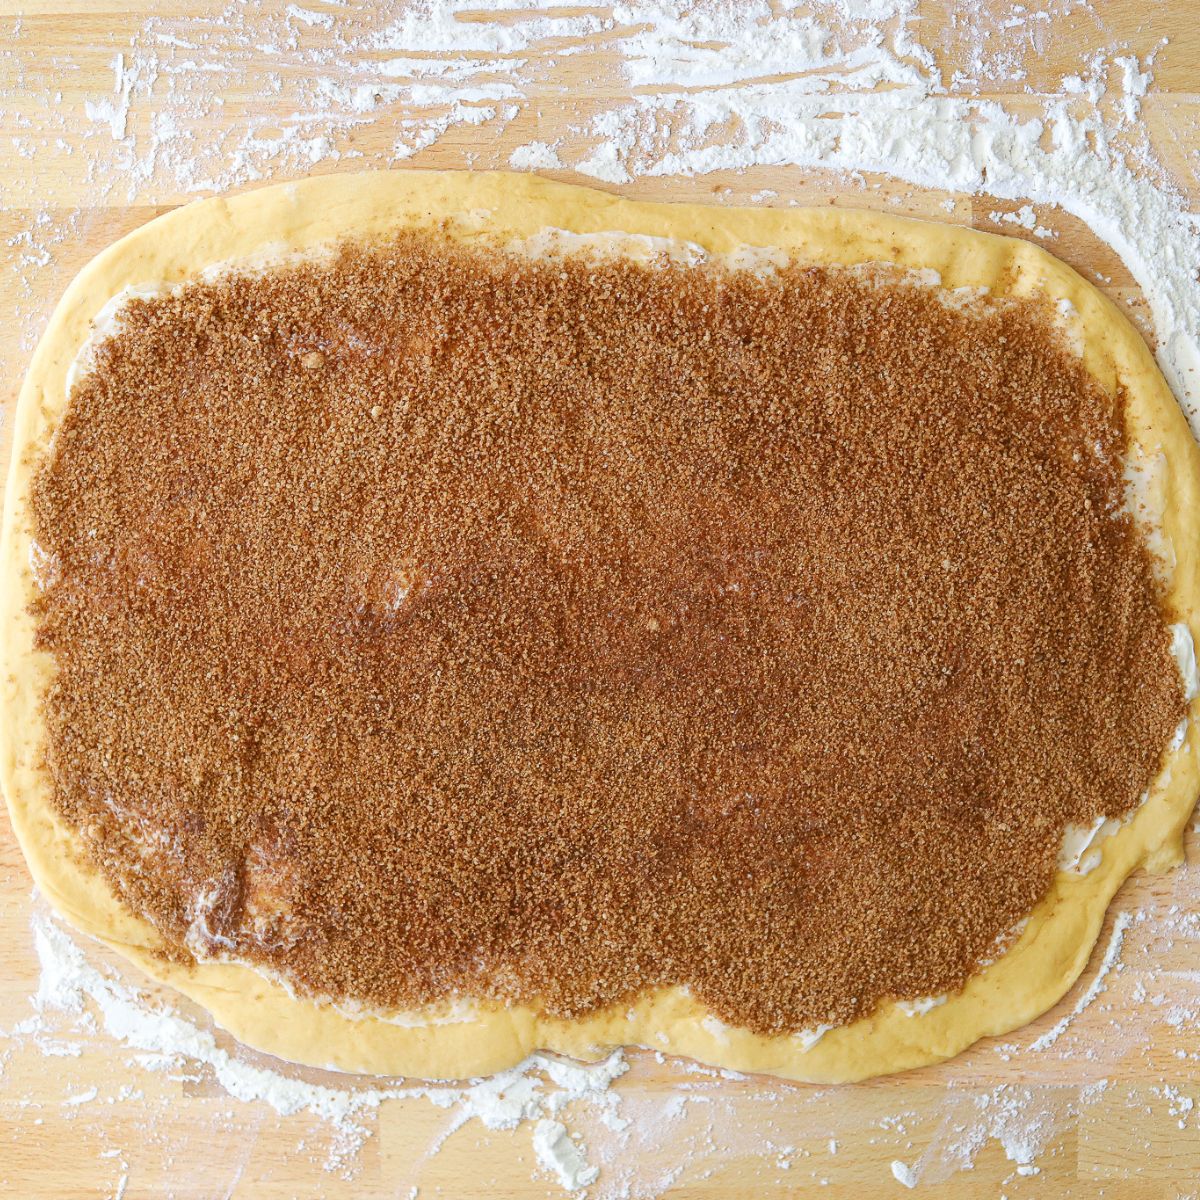 dough rolled out into a rectangle and coated in butter, brown sugar, and spices.